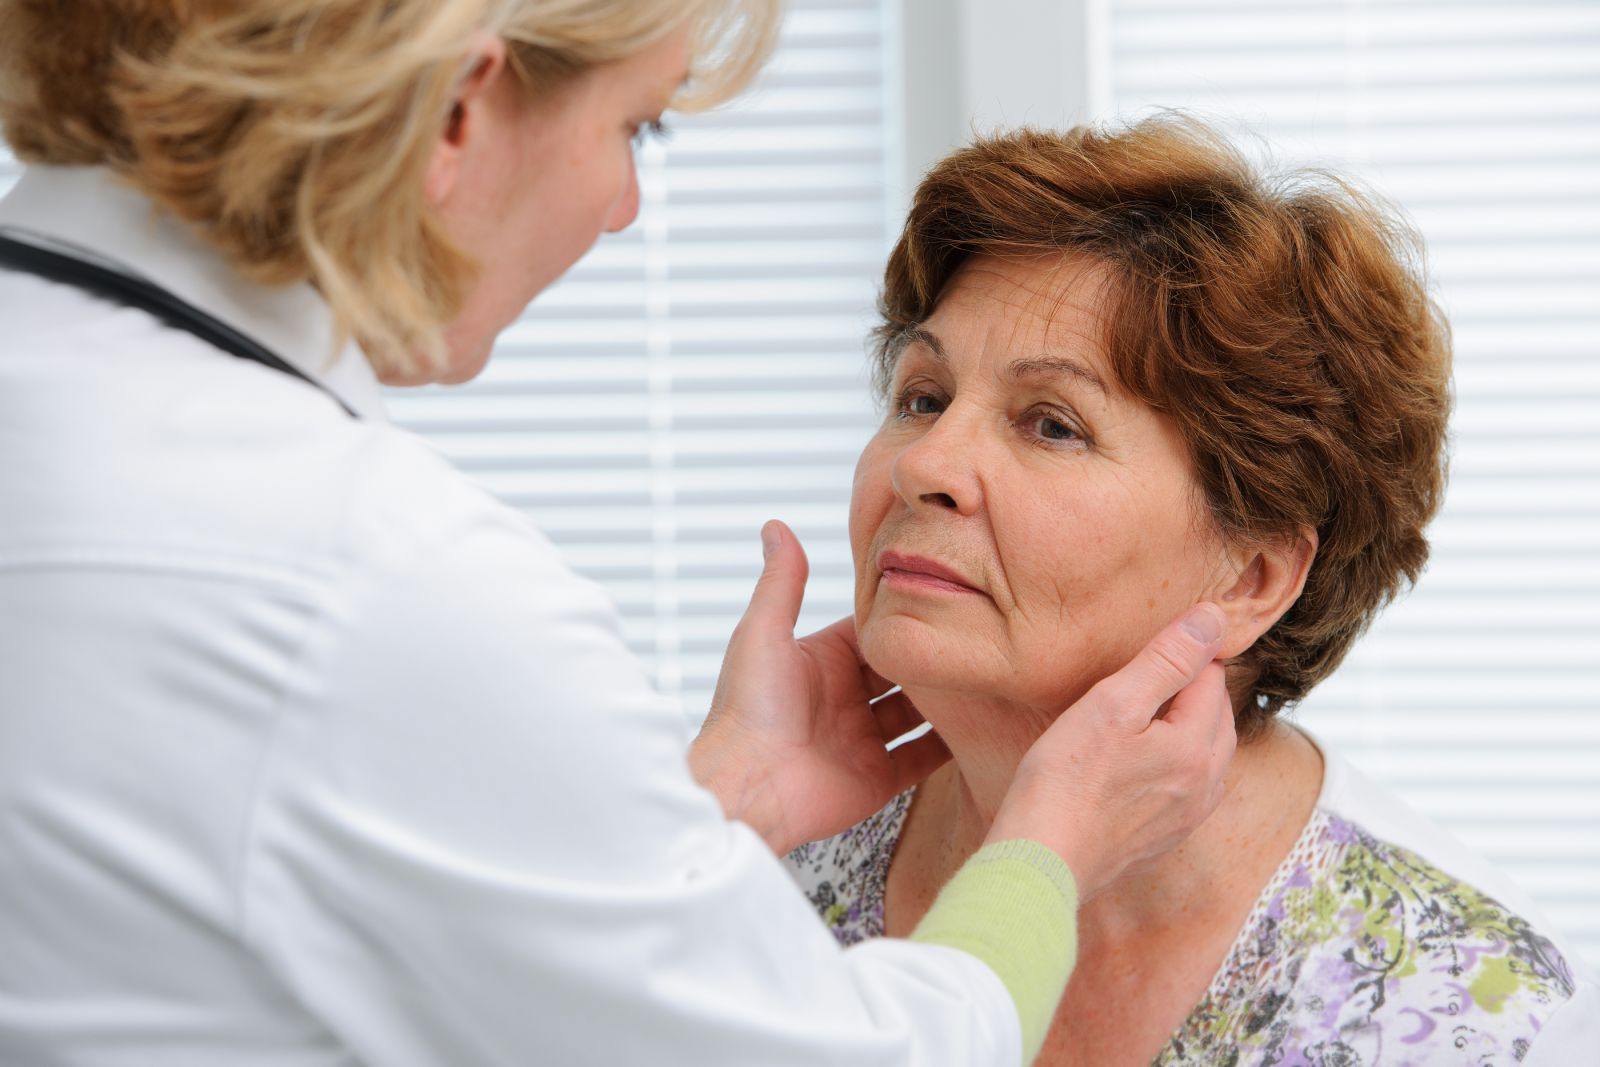 Hyperthyroidism and its Effects on the Body